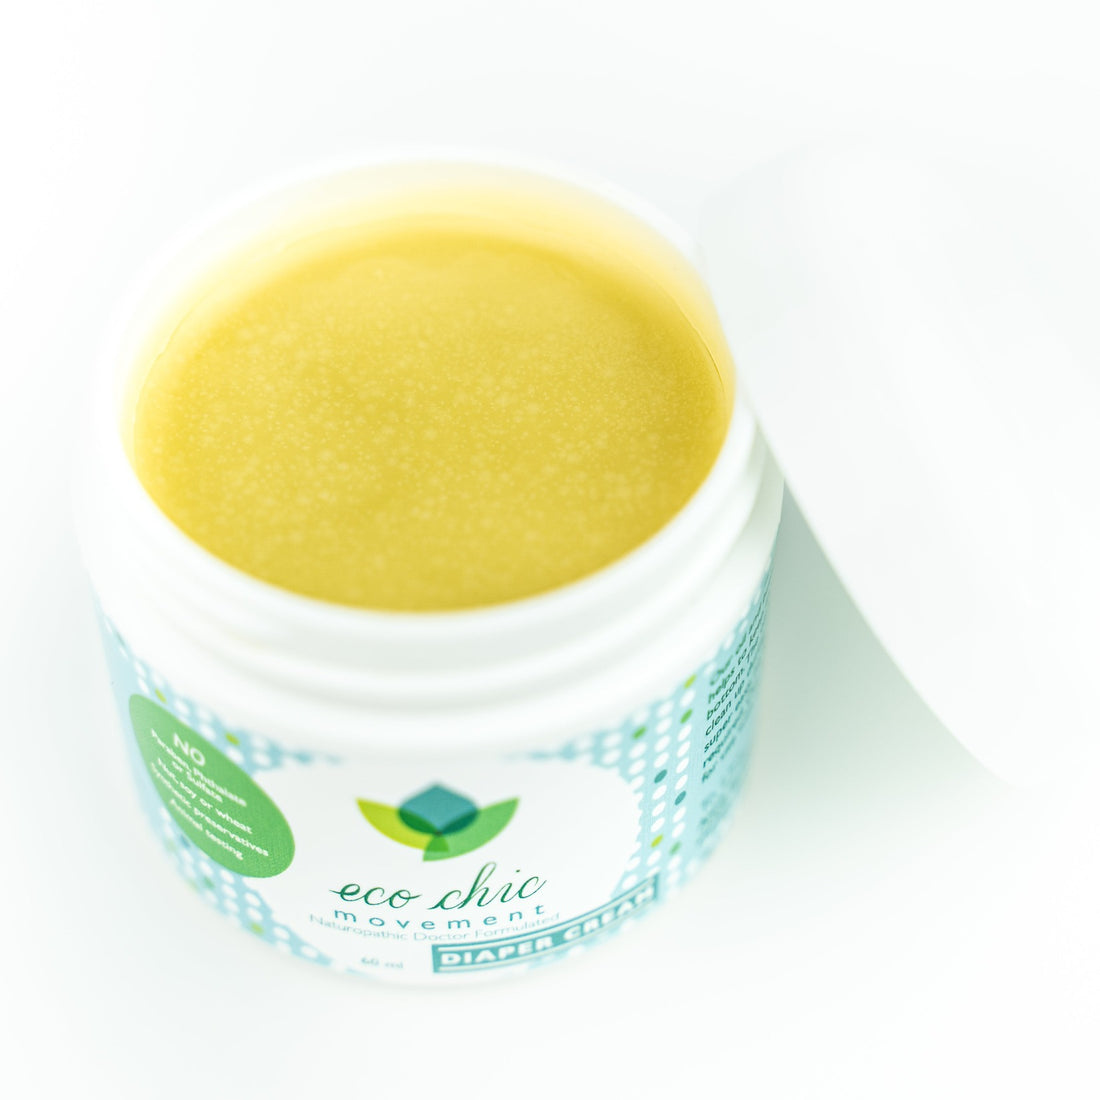 A view of the Eco Chic Movement natural diaper cream